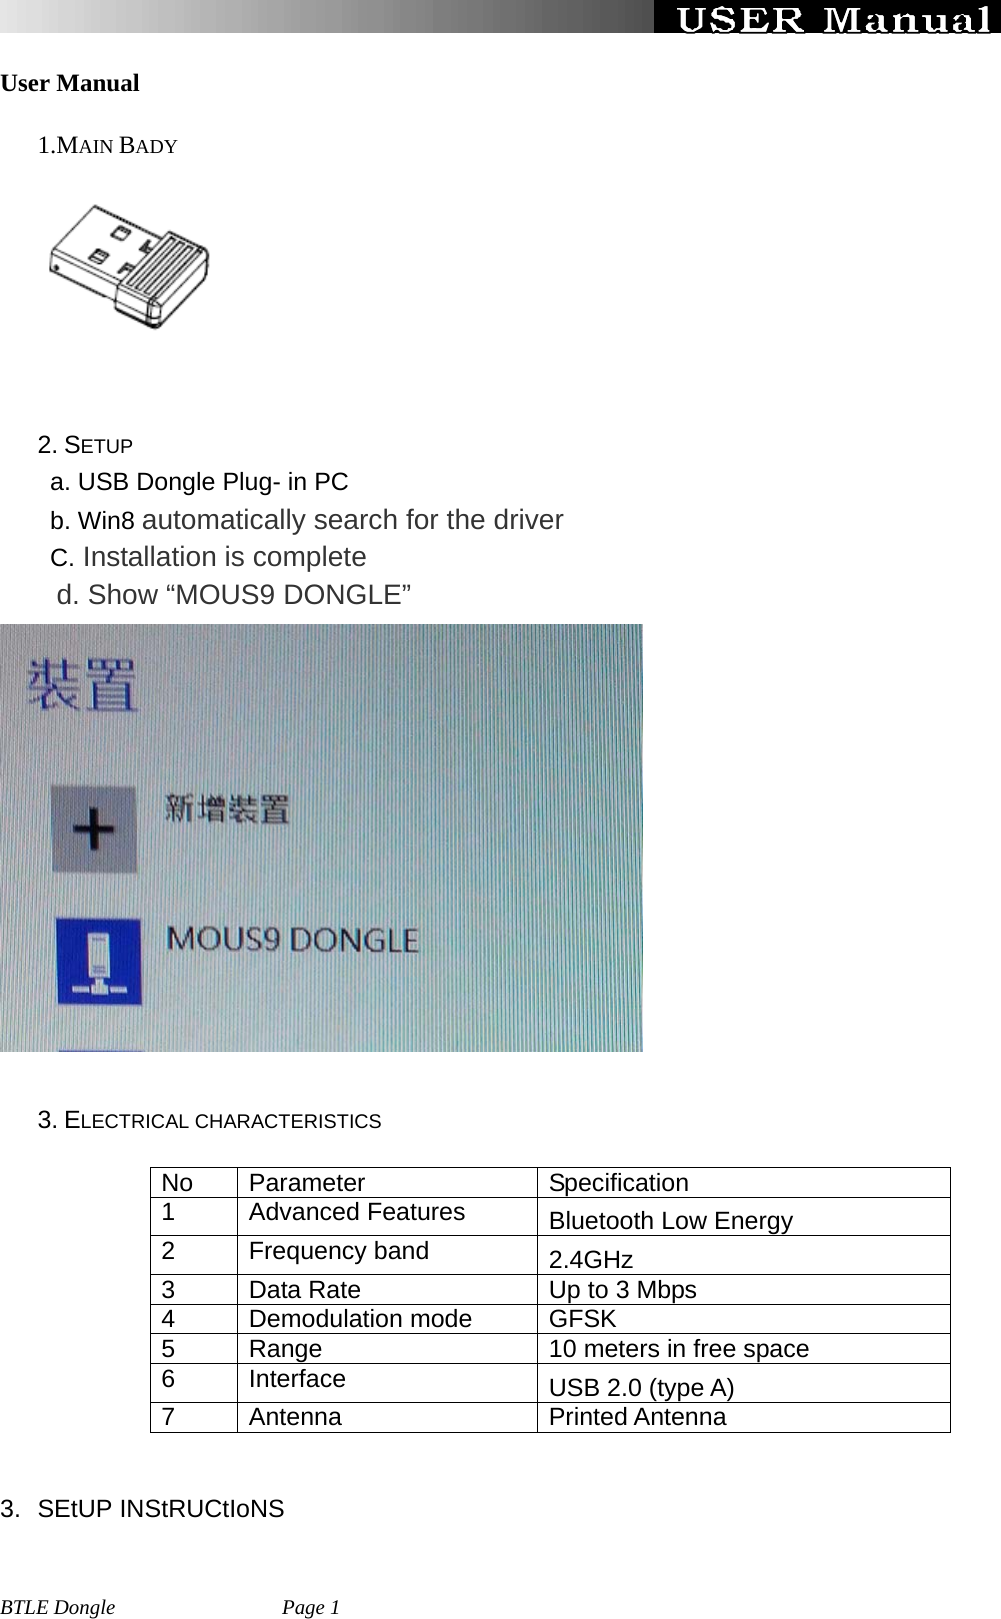   BTLE Dongle                Page 1 User Manual 1.MAIN BADY         2. SETUP         a. USB Dongle Plug- in PC     b. Win8 automatically search for the driver      C. Installation is complete     d. Show “MOUS9 DONGLE”    3. ELECTRICAL CHARACTERISTICS   No Parameter   Specification 1 Advanced Features  Bluetooth Low Energy 2 Frequency band  2.4GHz 3  Data Rate  Up to 3 Mbps 4 Demodulation mode GFSK 5  Range    10 meters in free space 6  Interface      USB 2.0 (type A) 7 Antenna  Printed Antenna    3. SEtUP INStRUCtIoNS 